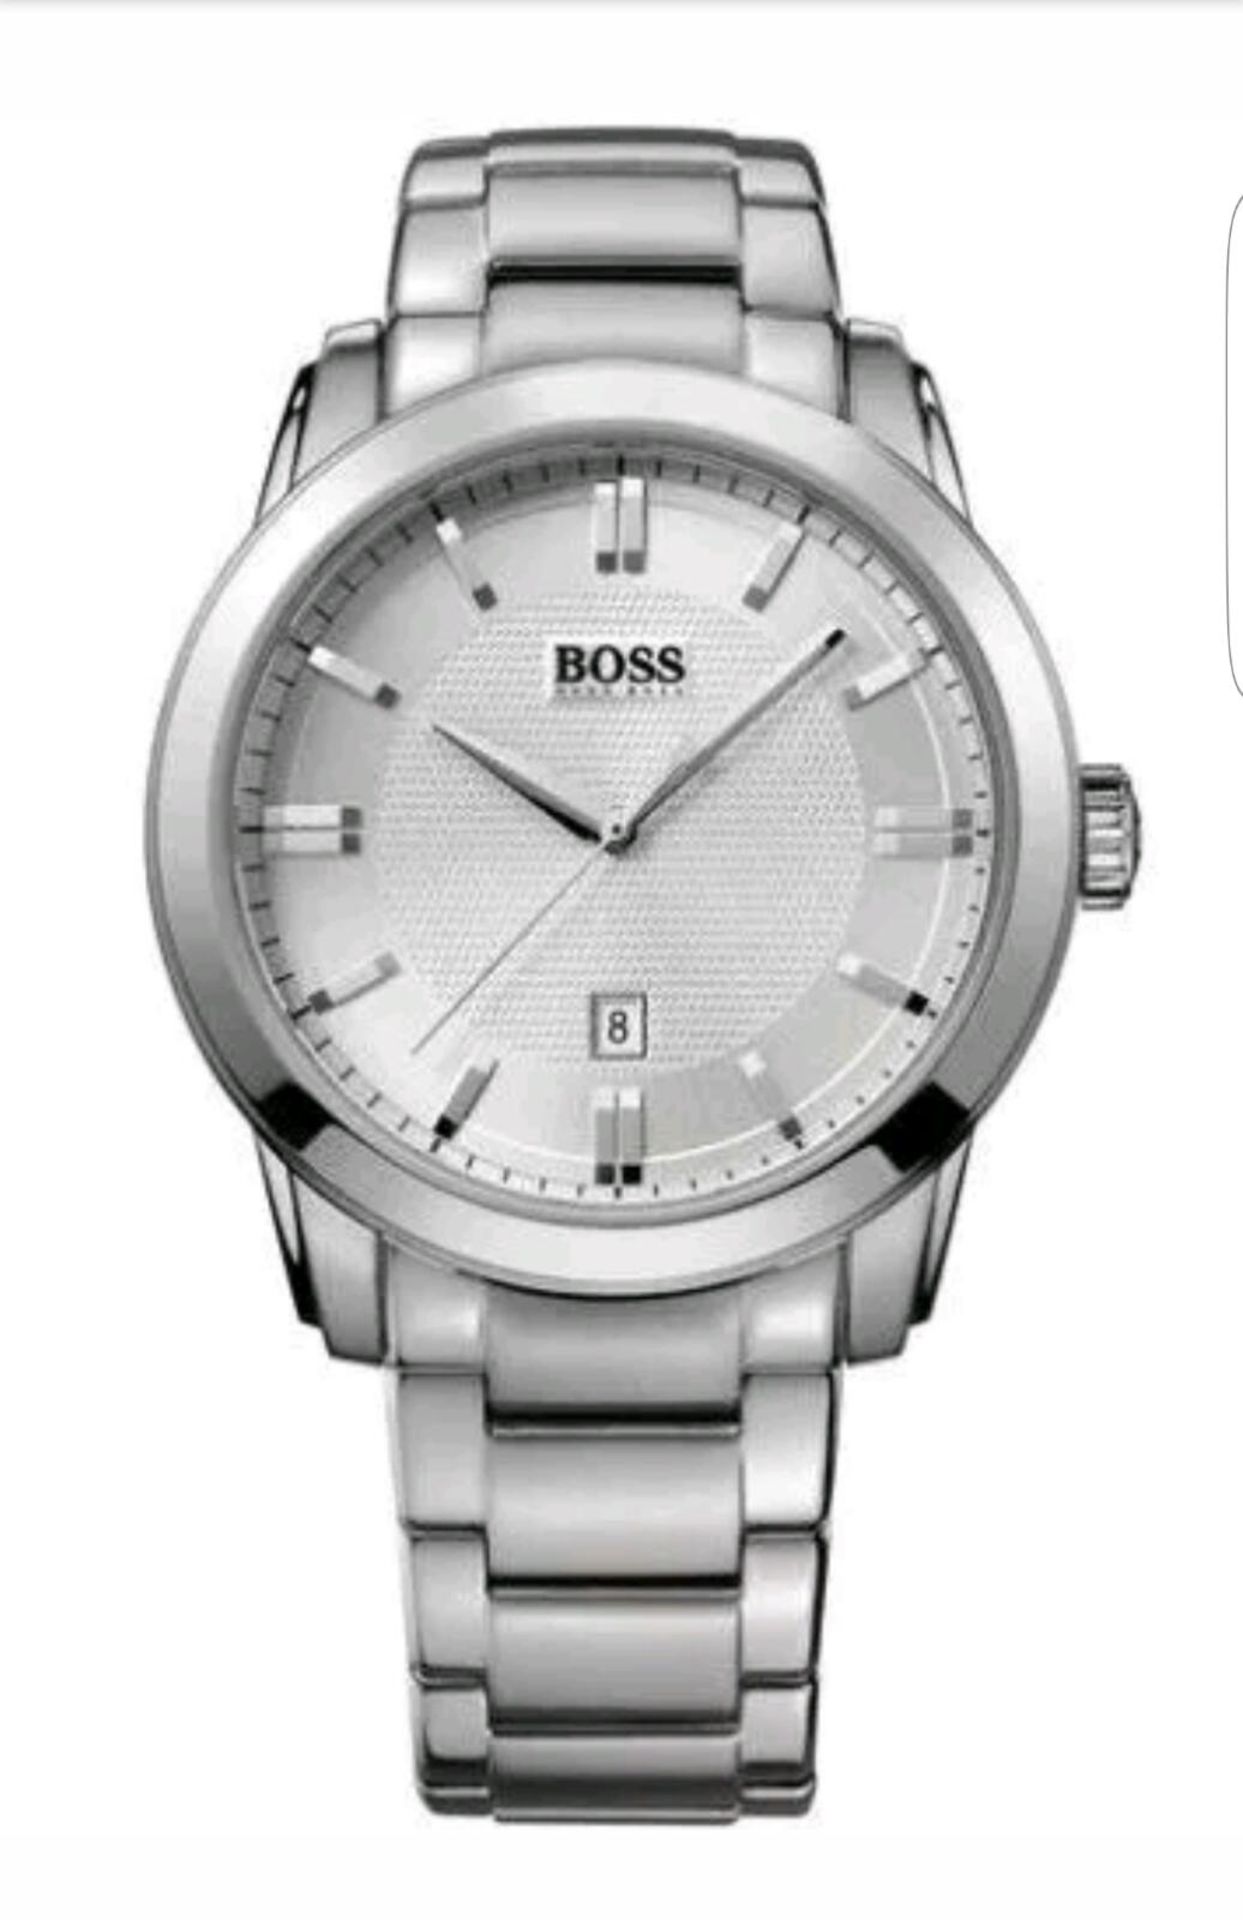 BRAND NEW GENTS HUGO BOSS WATCH, HB1512768, COMPLETE WITH ORIGINAL BOX AND MANUAL - RRP £399